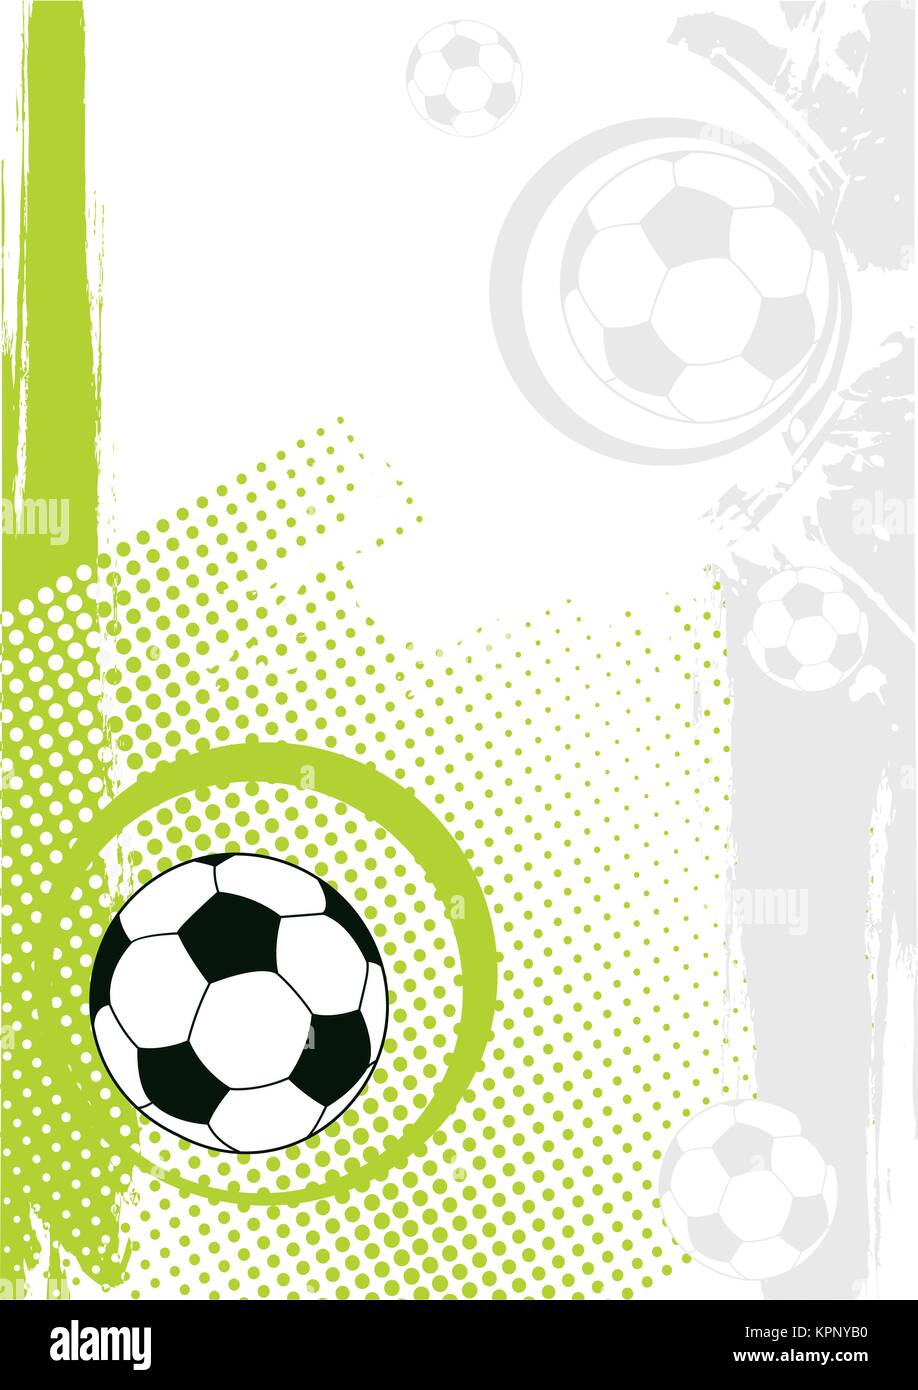 Vertical football Stock Vector Images - Alamy